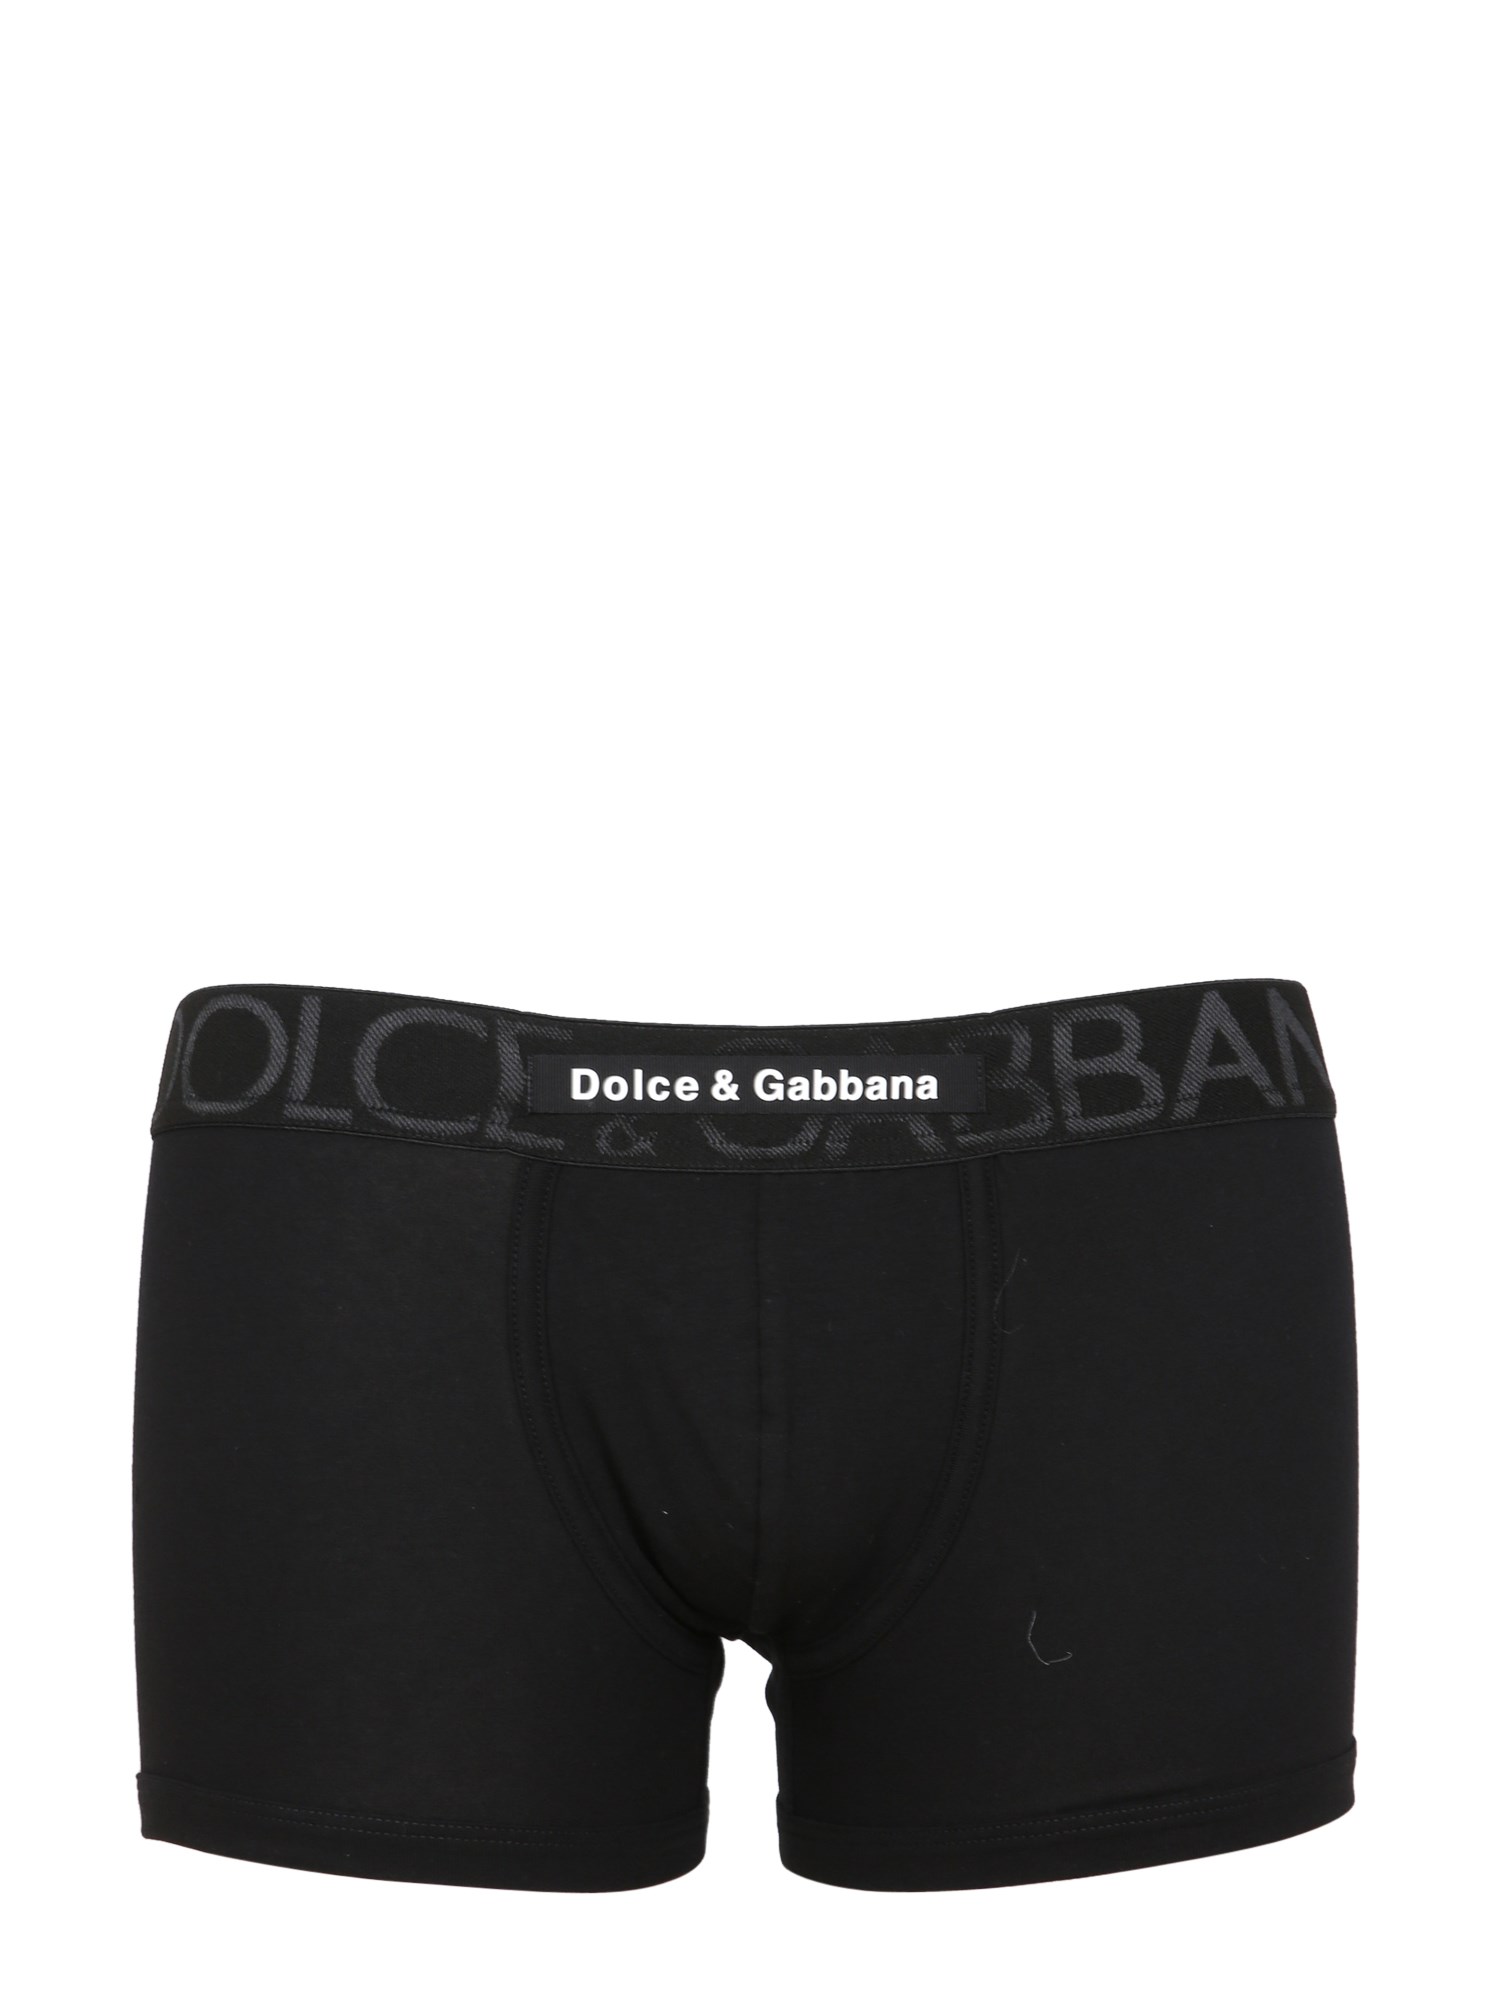 dolce & gabbana boxers with logo band